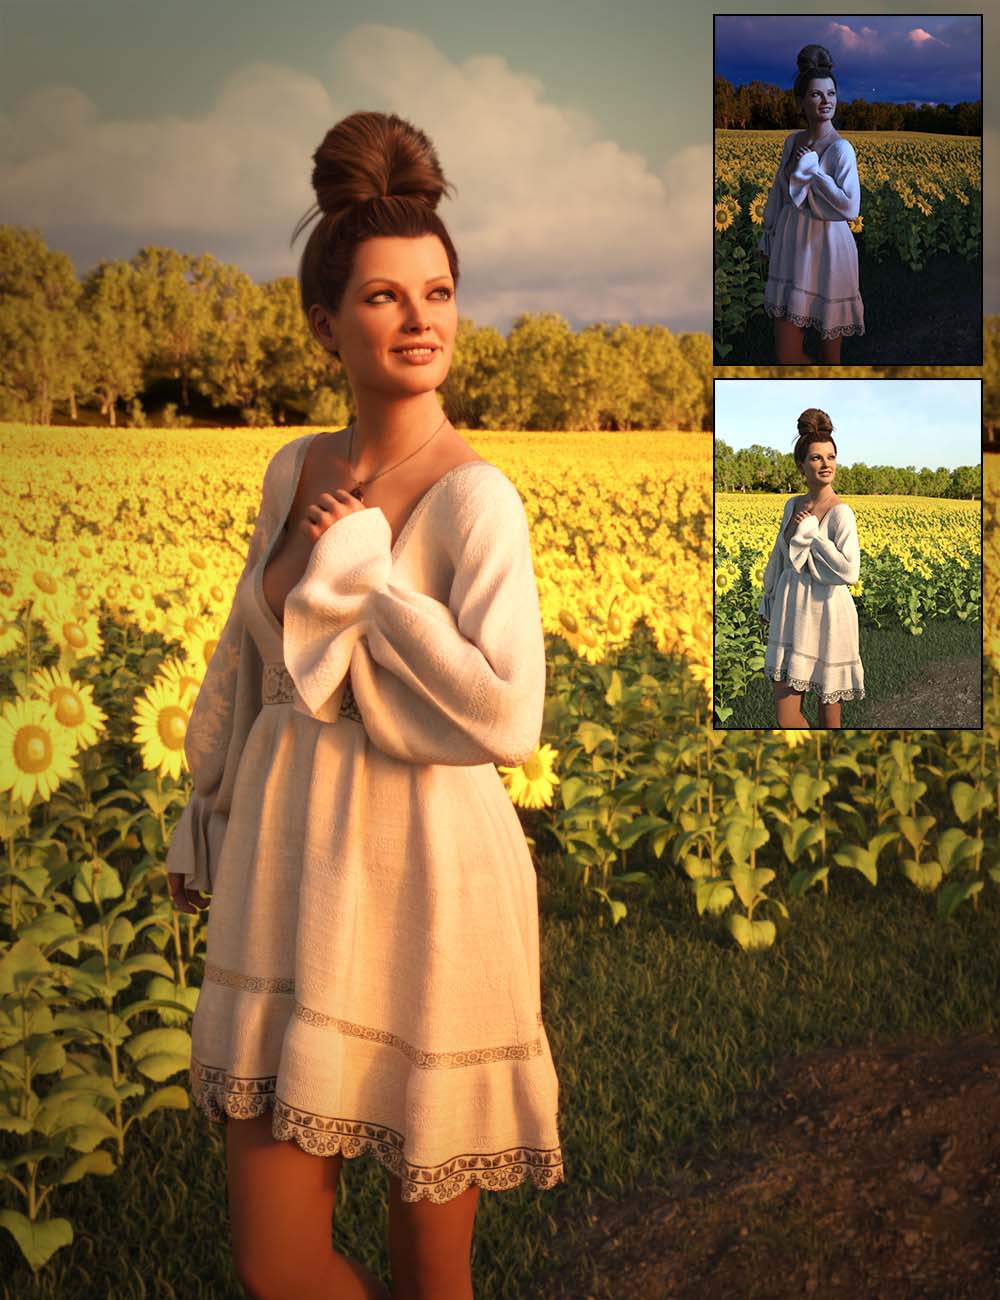 Sunflower Fields 8k Iray HDRIs by: DimensionTheory, 3D Models by Daz 3D